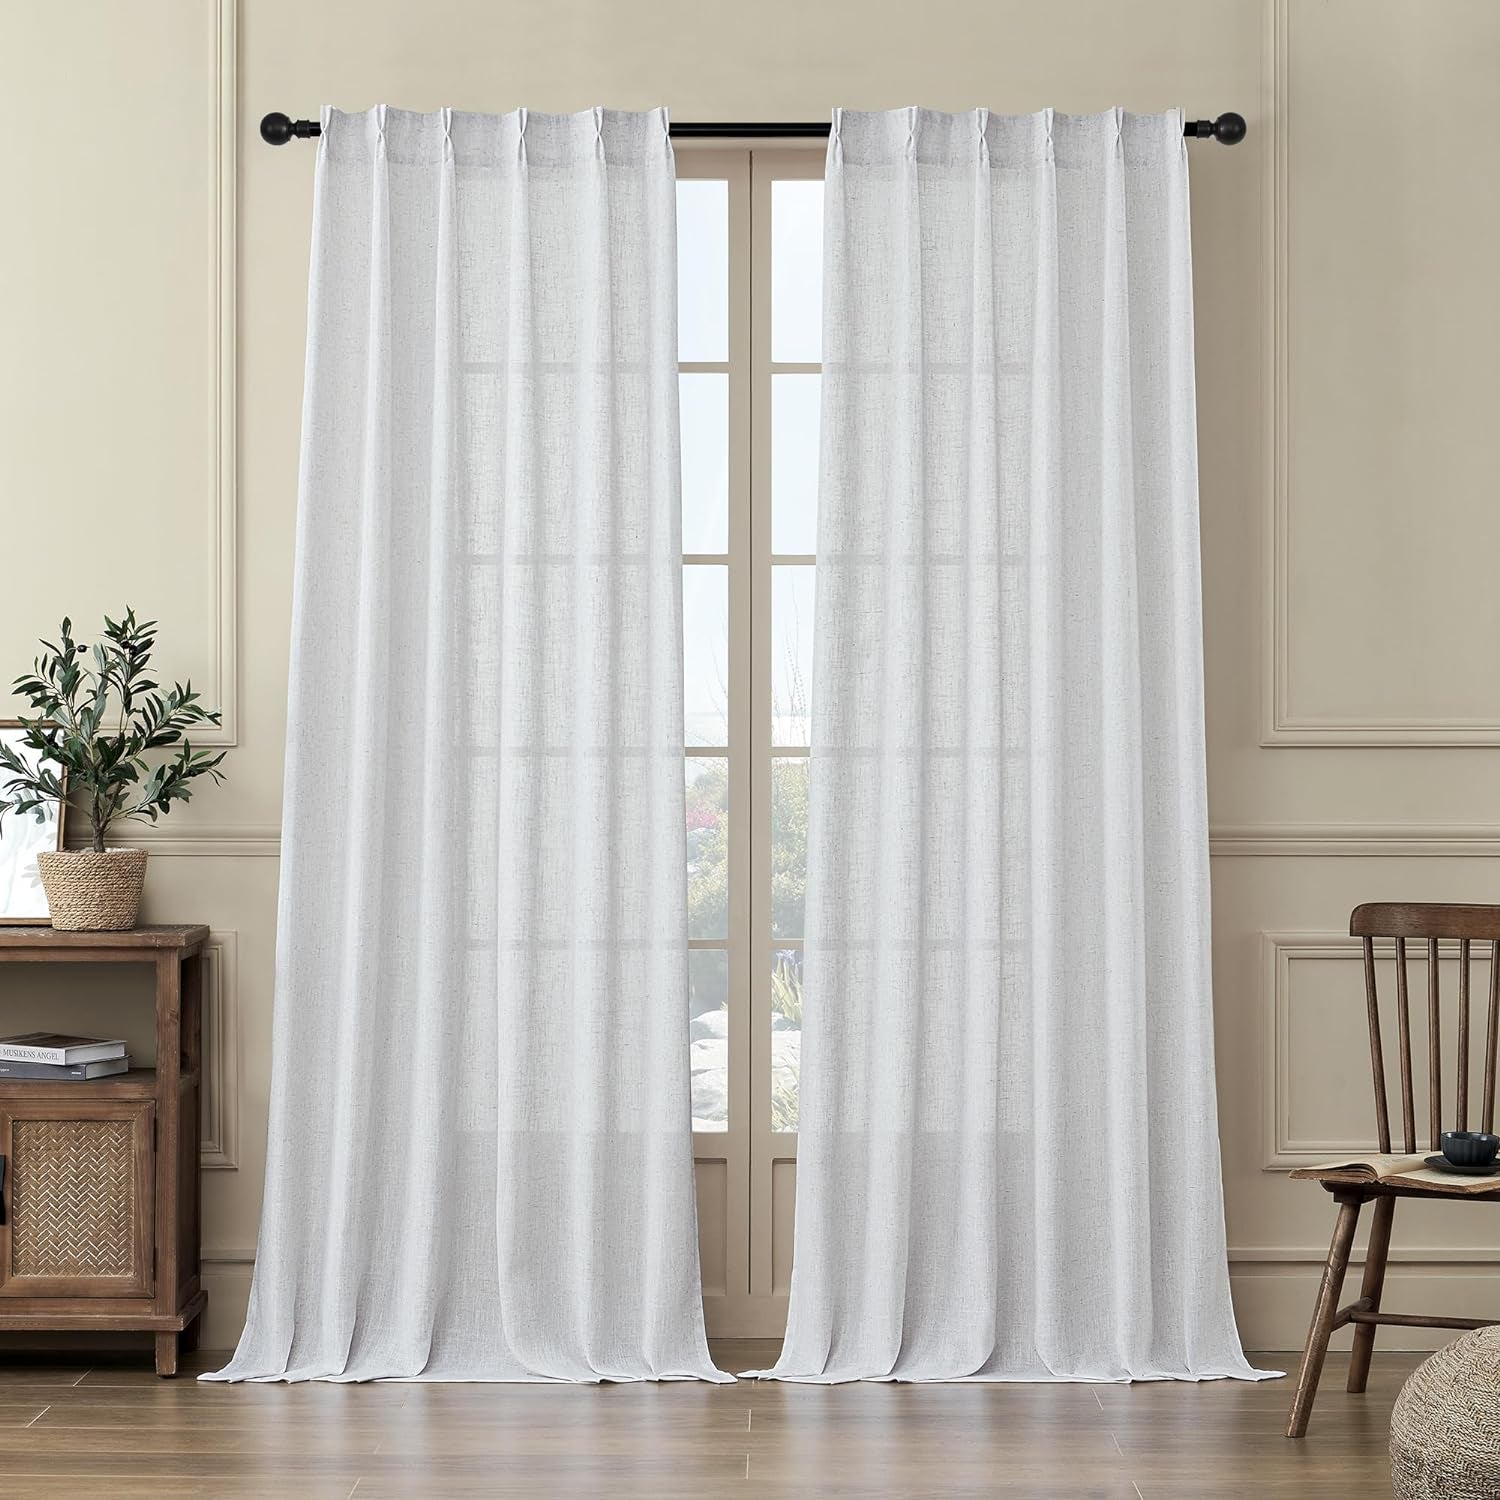 MASWOND White Pinch Pleated Curtains 90 Inches Long 2 Panels for Living Room Semi Sheer Linen Curtains Pinch Pleat Drapes for Traverse Rod Light Filtering Curtains for Dining Bedroom W38Xl90 Length  MASWOND   